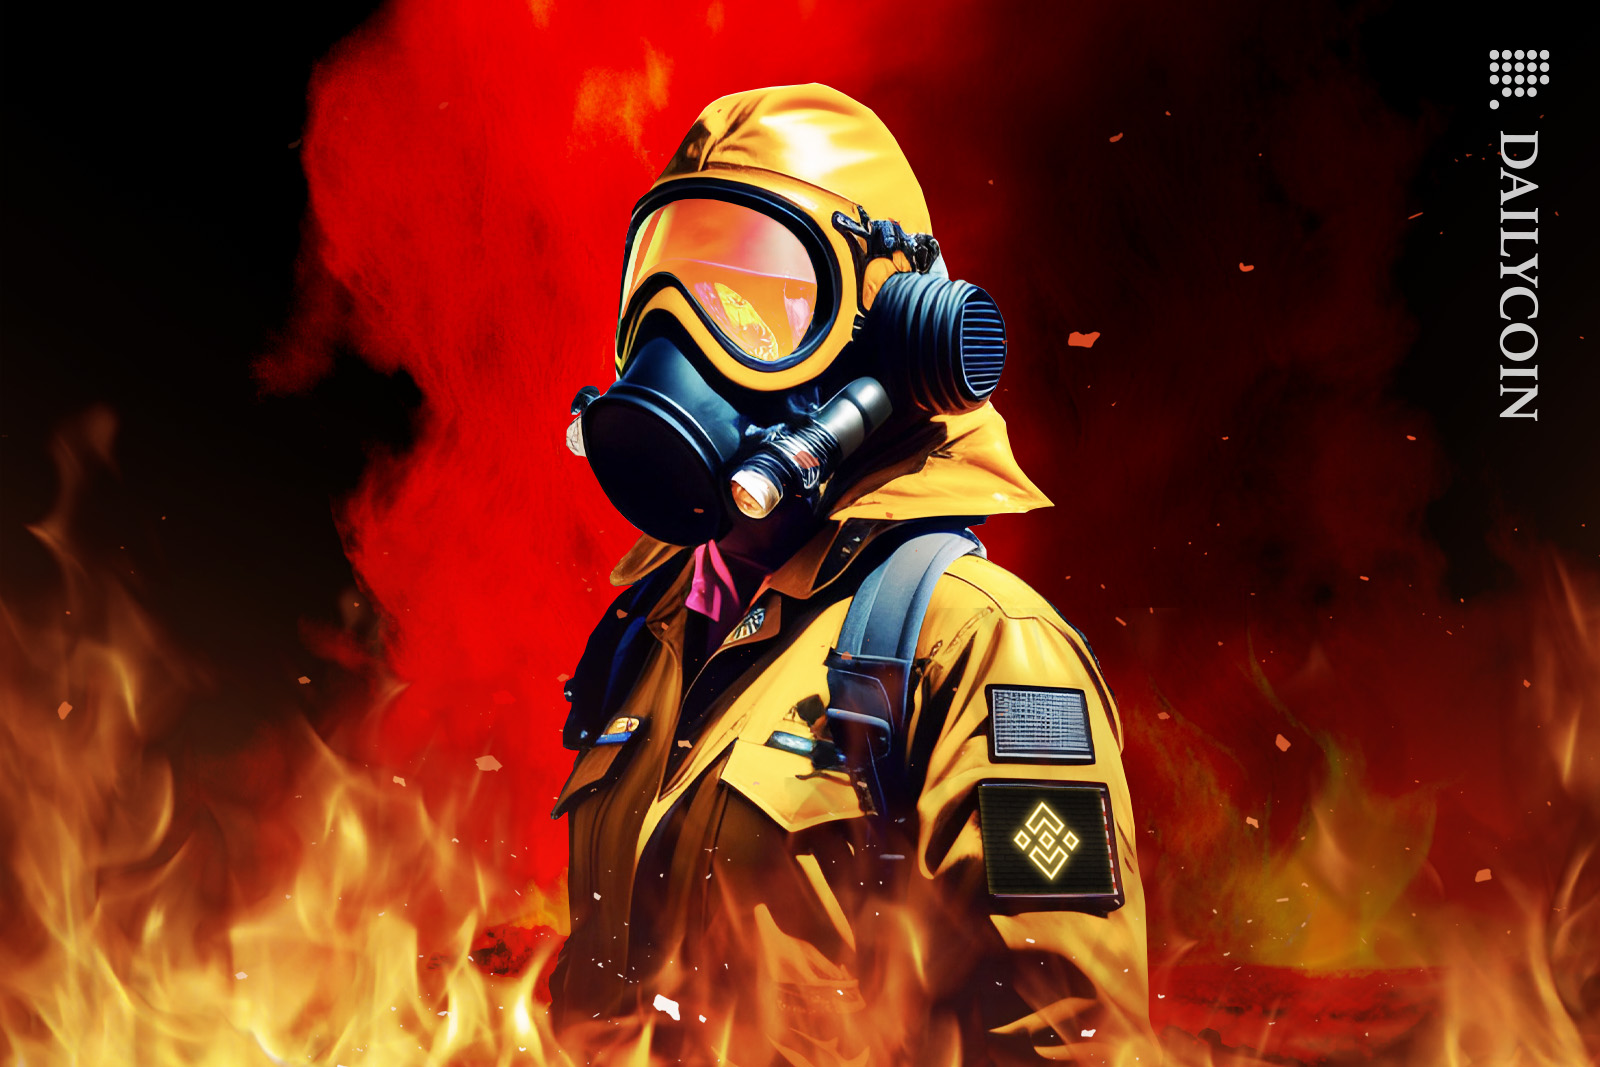 Man in Yellow binance hazmat suit and gas mask surrounded by fire.